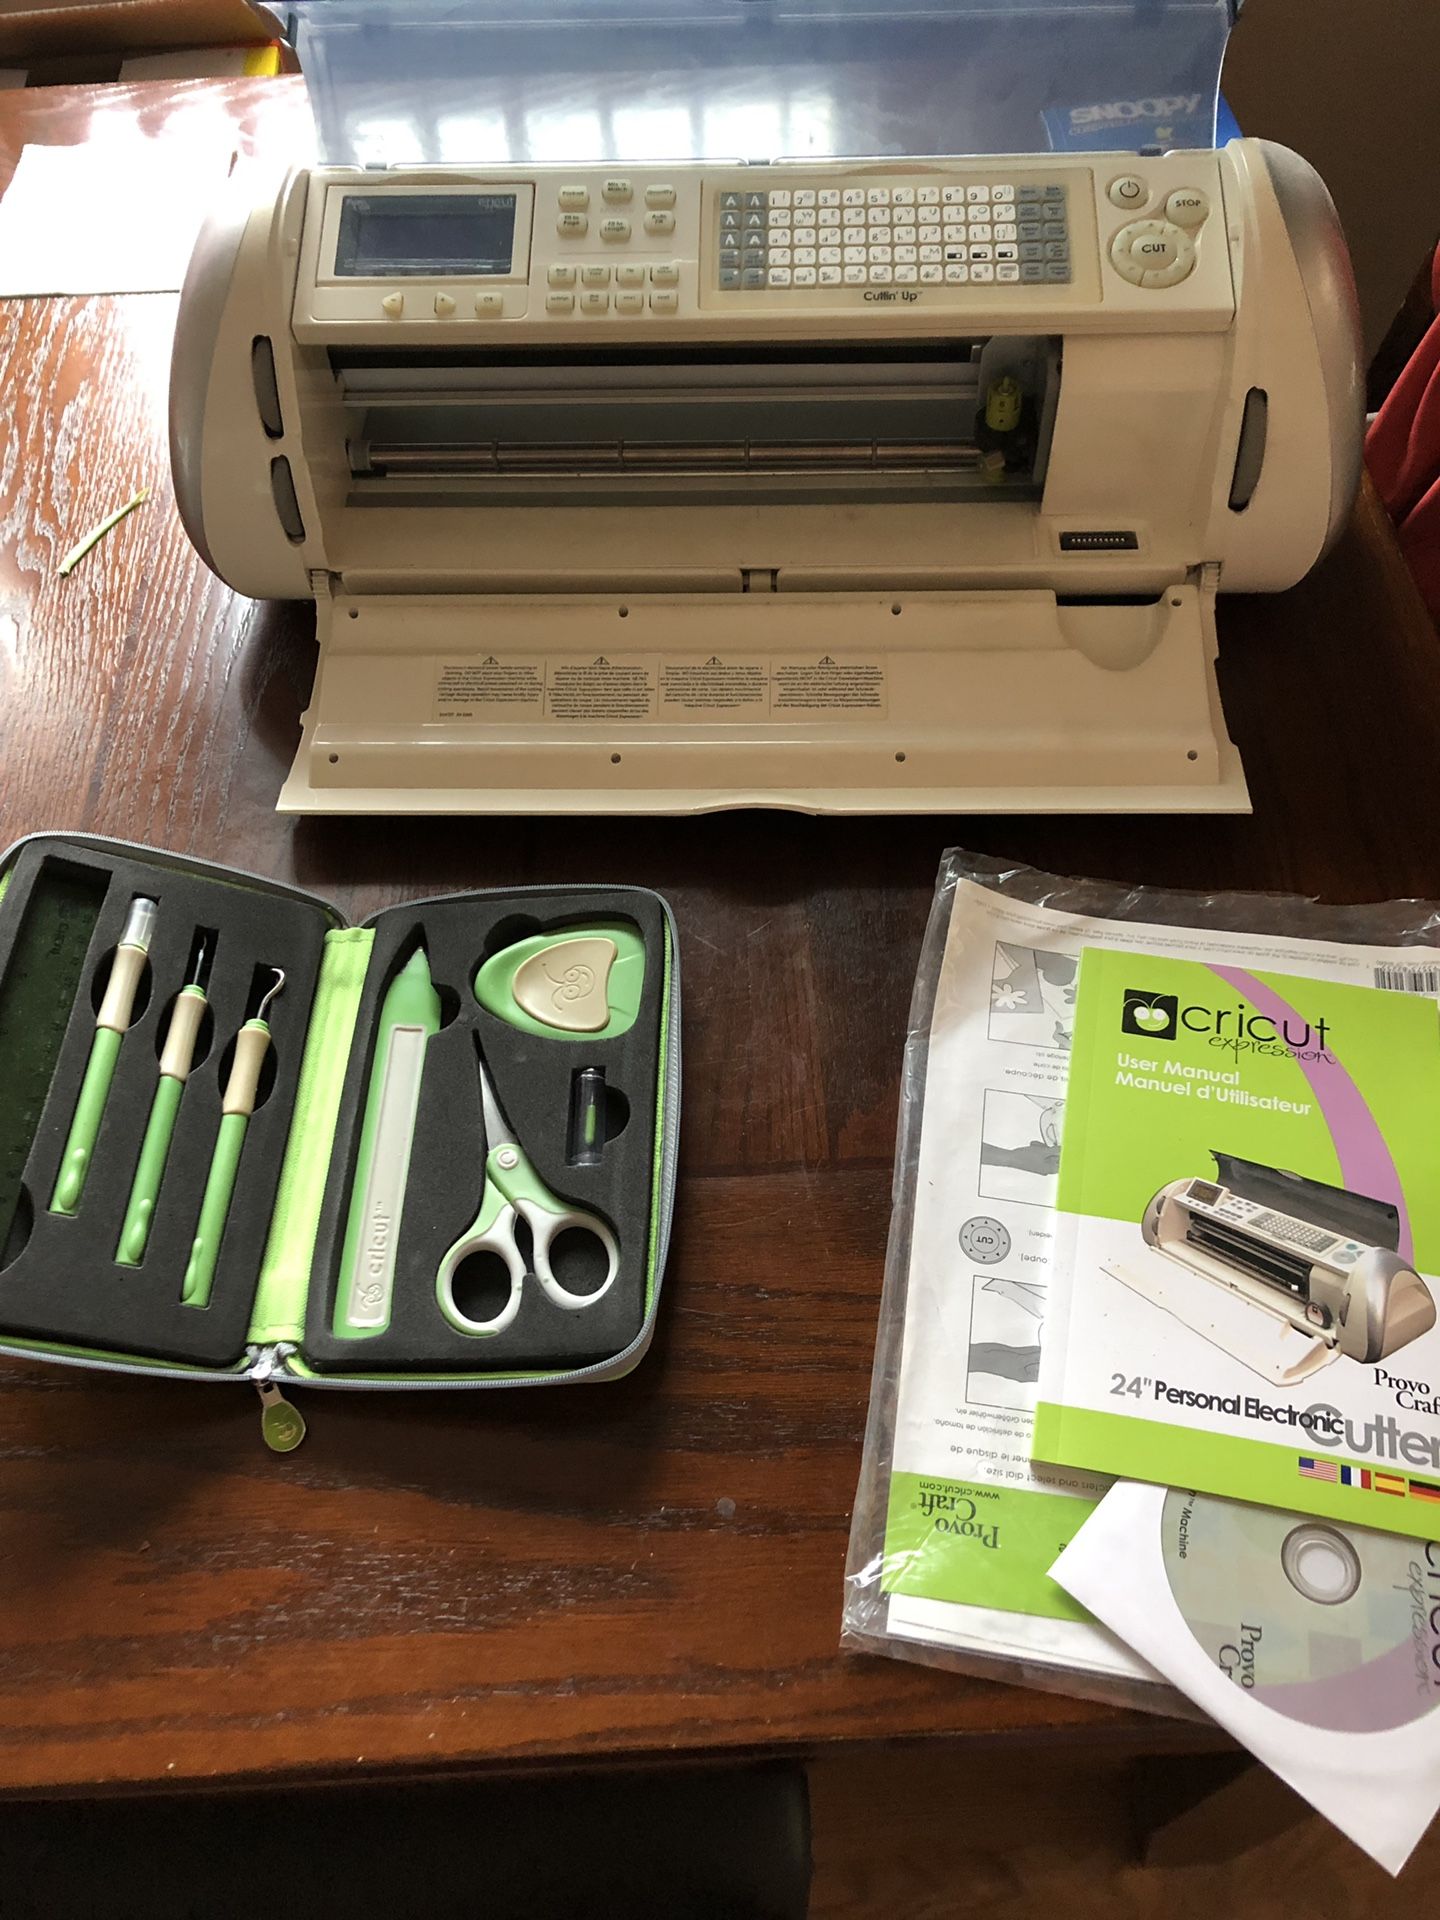 Cricut expression 24” cutter with cartridges